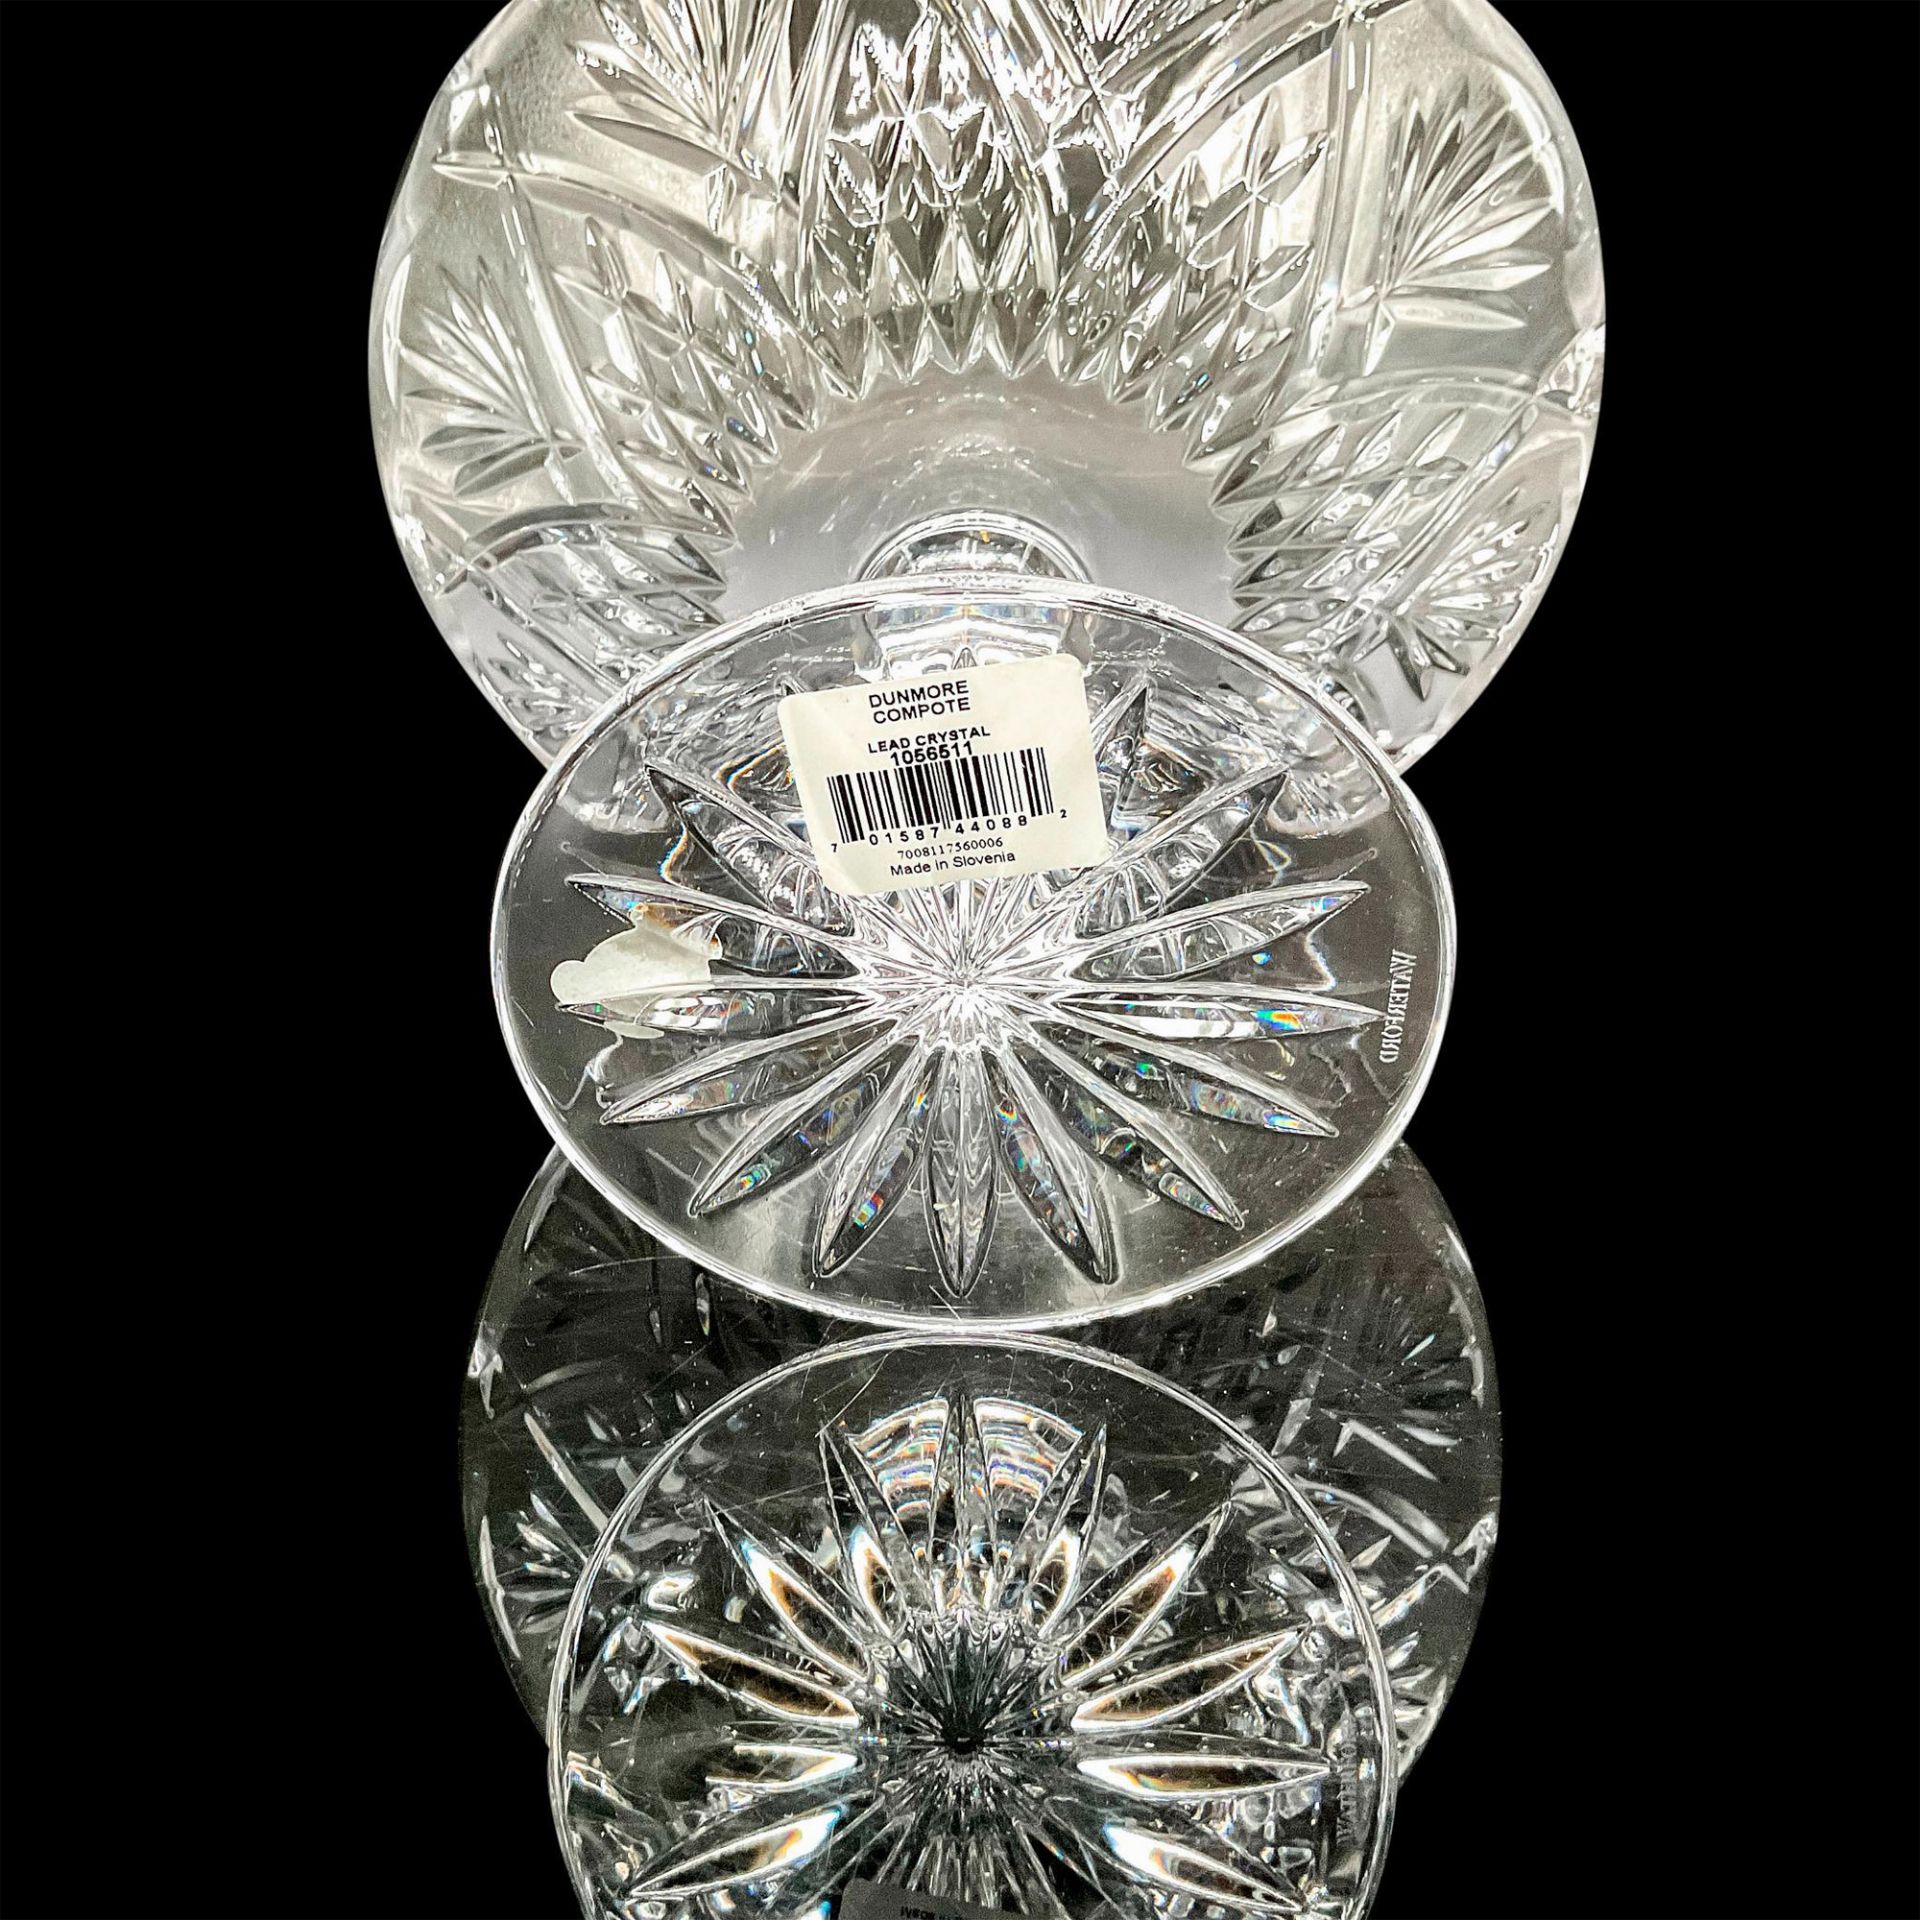 Waterford Crystal Footed Compote Bowl, Dunmore - Image 3 of 4